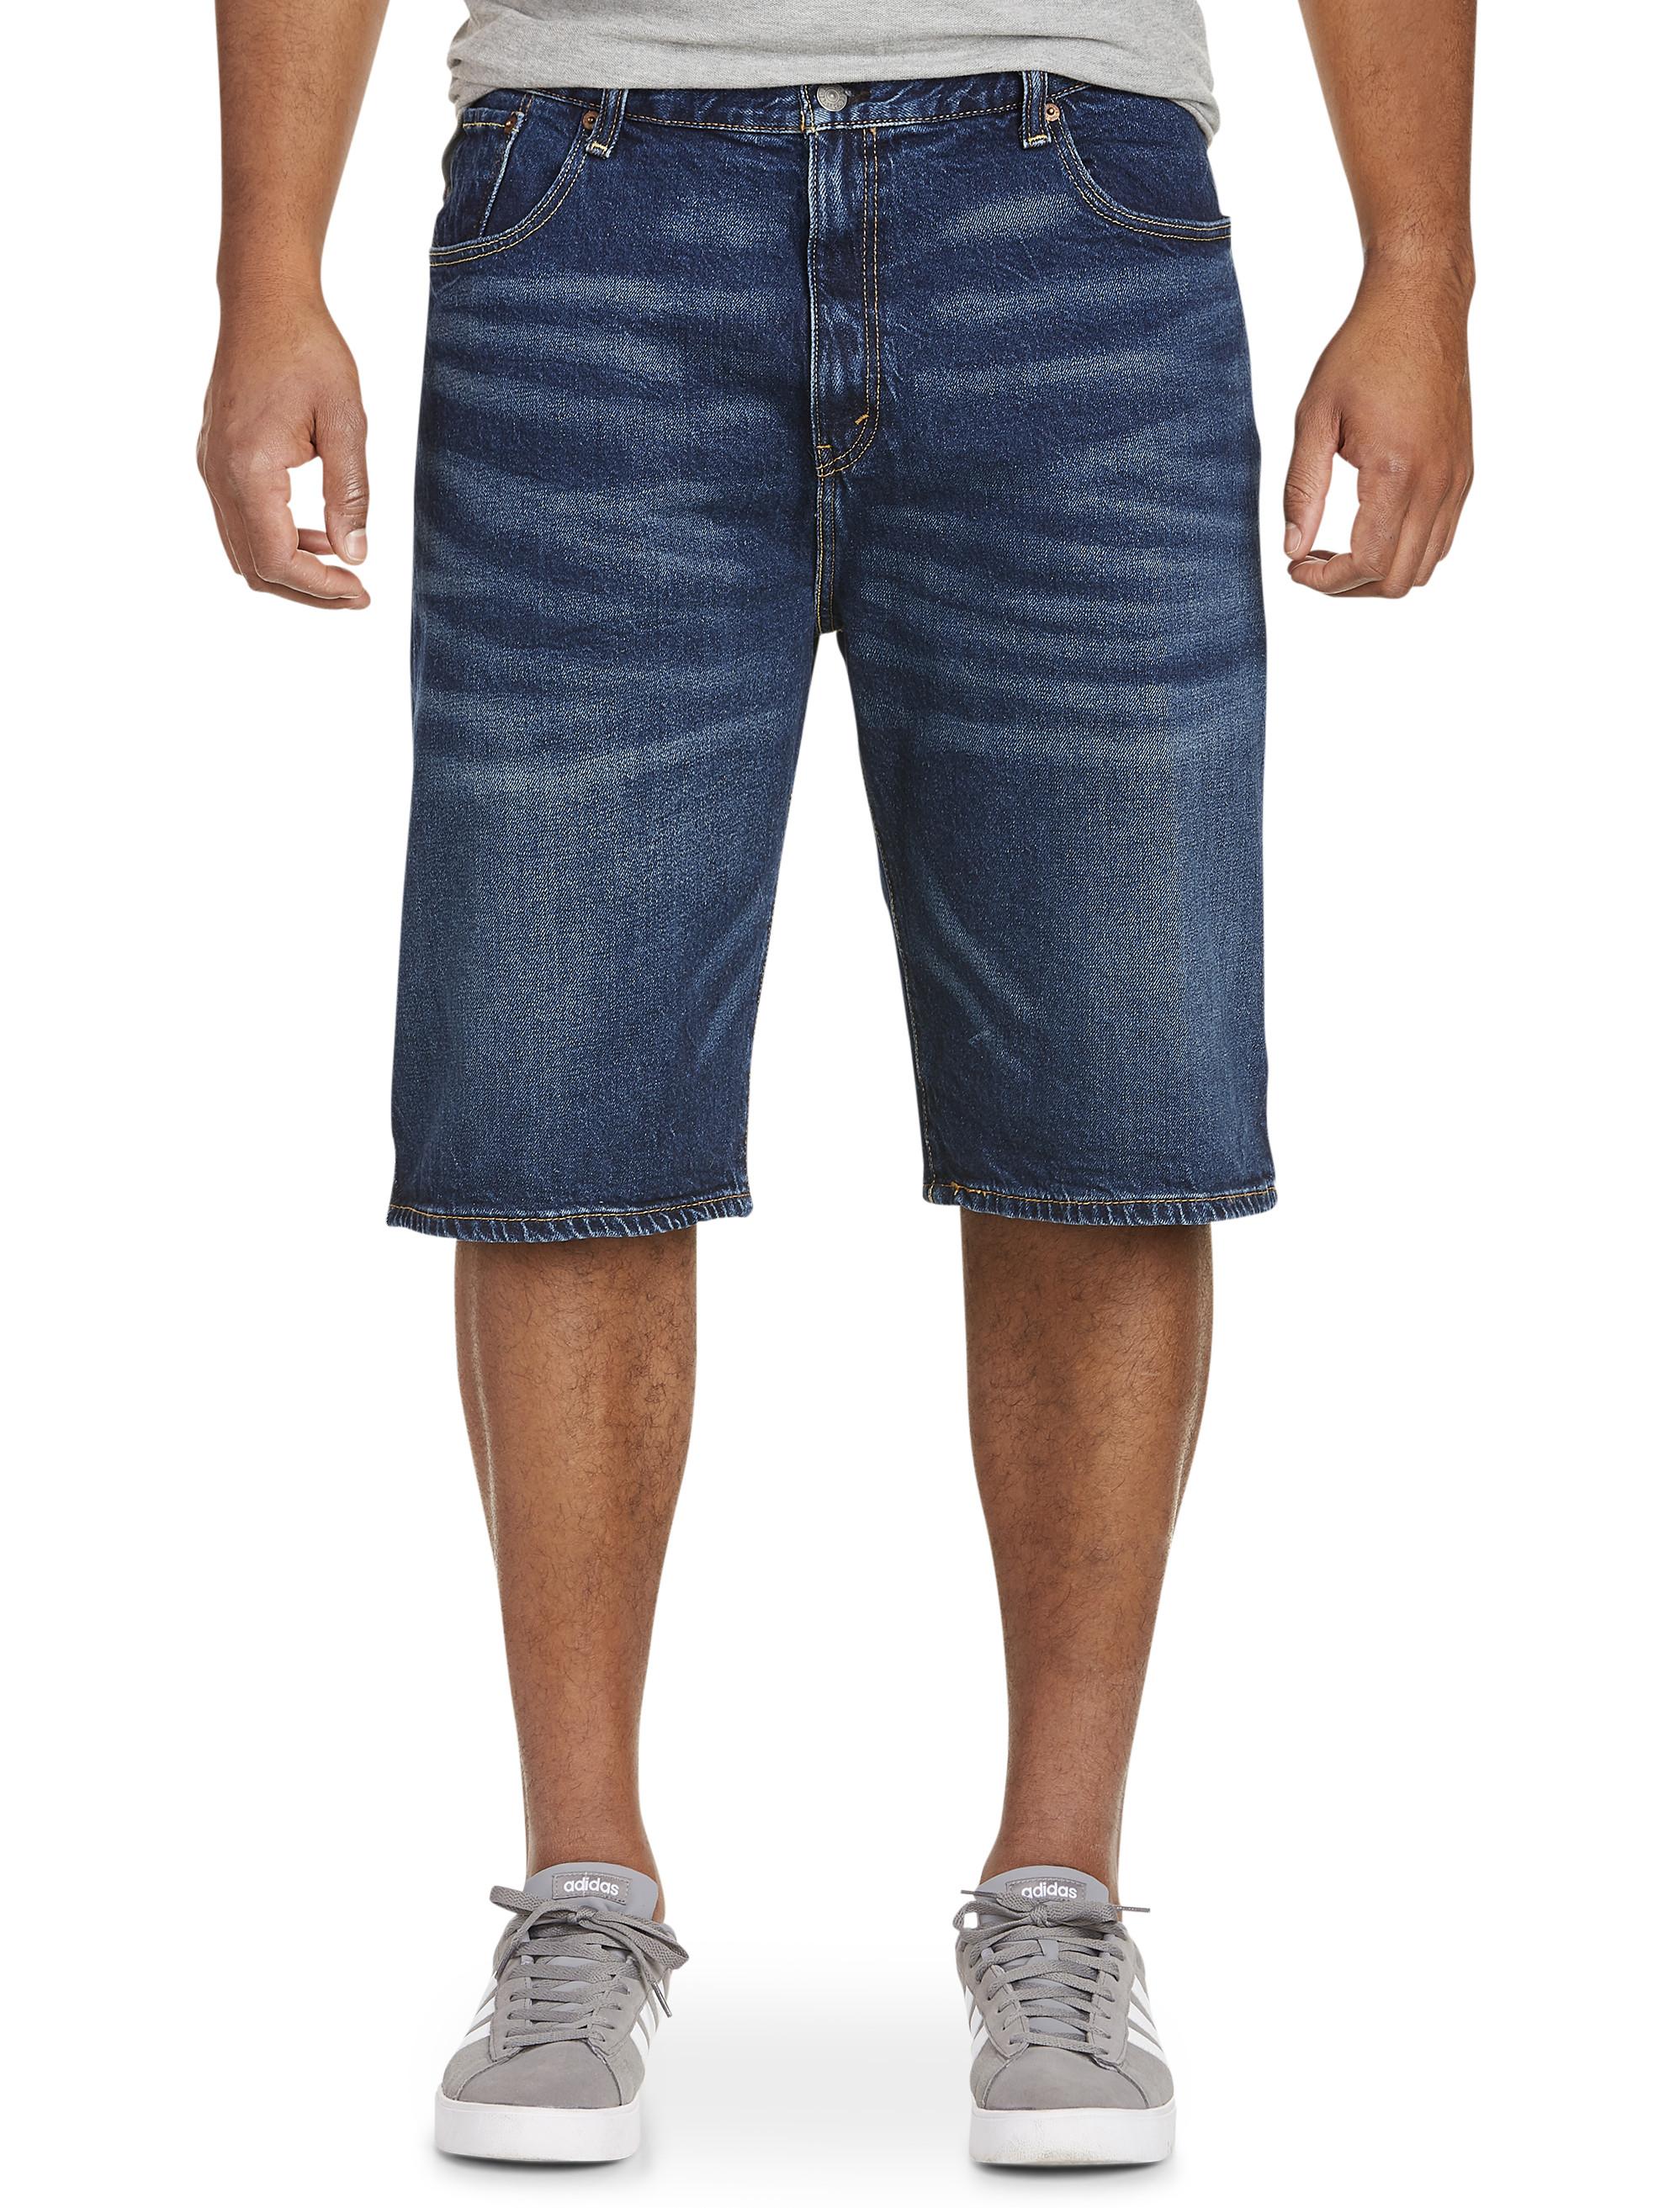 Levi's Big & Tall 569 Loose-fit Denim Shorts in Blue for Men - Lyst